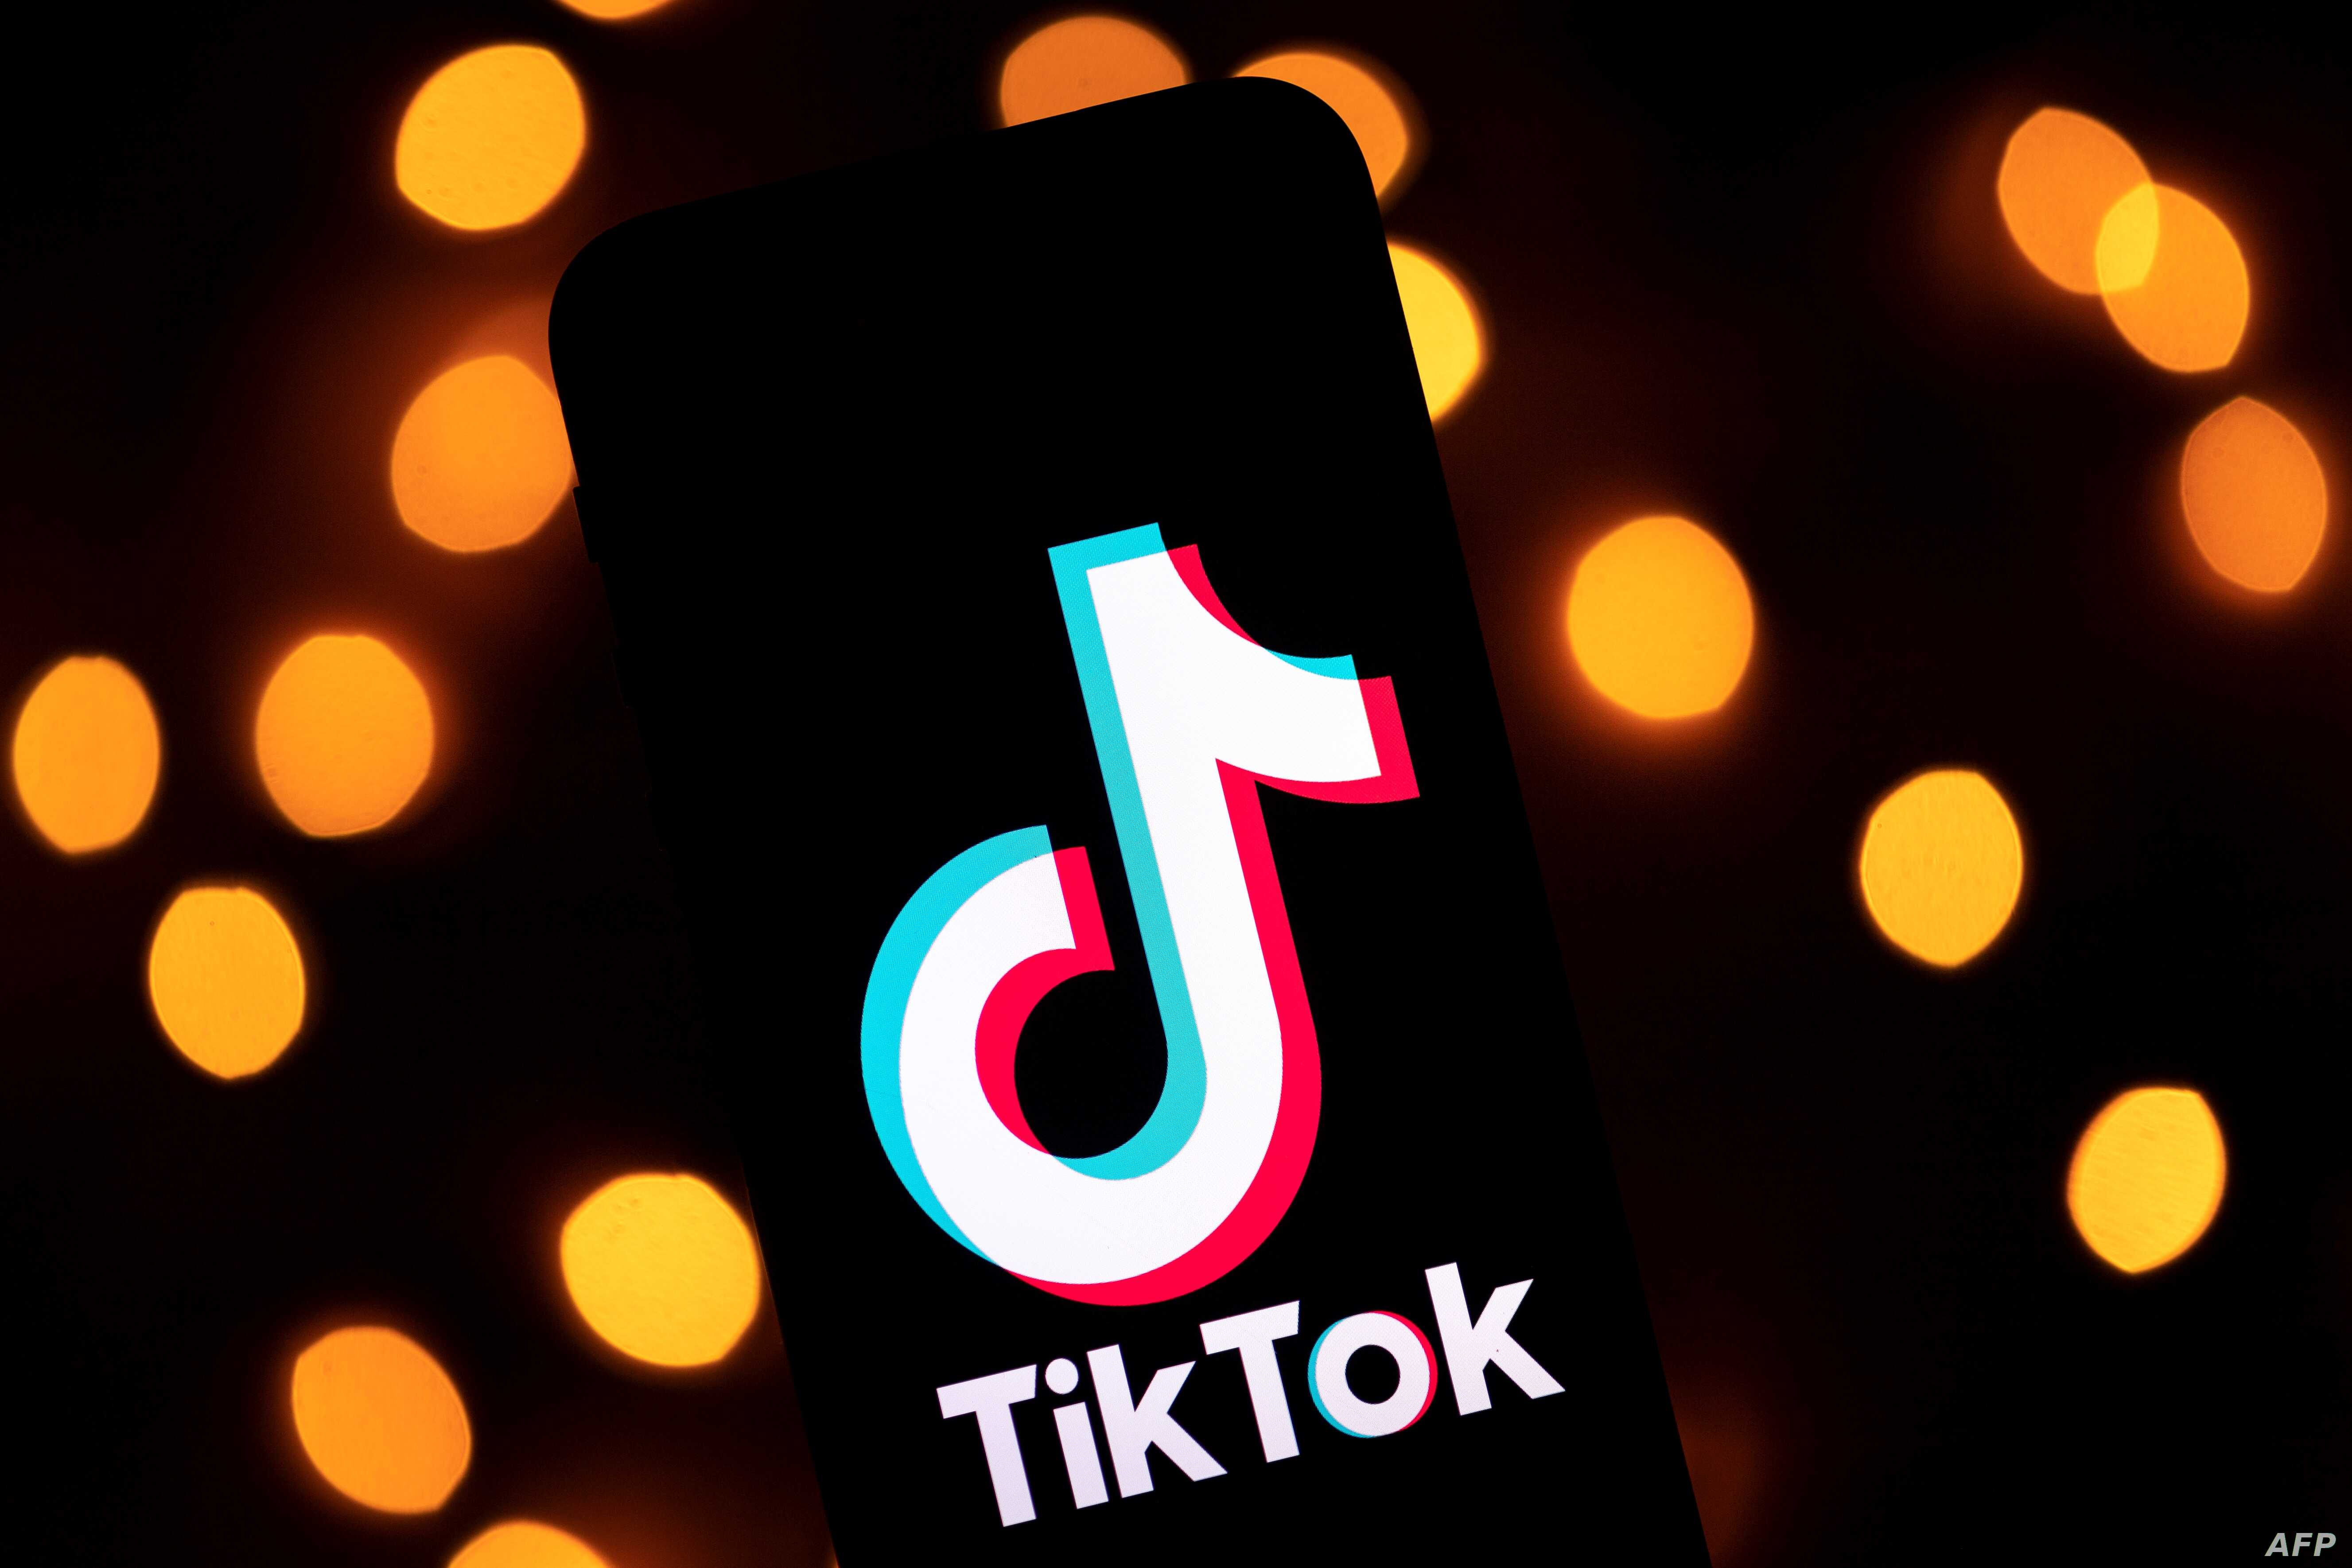 TikTok Logo - US Lawmakers Told Of Security Risks From China Owned TikTok